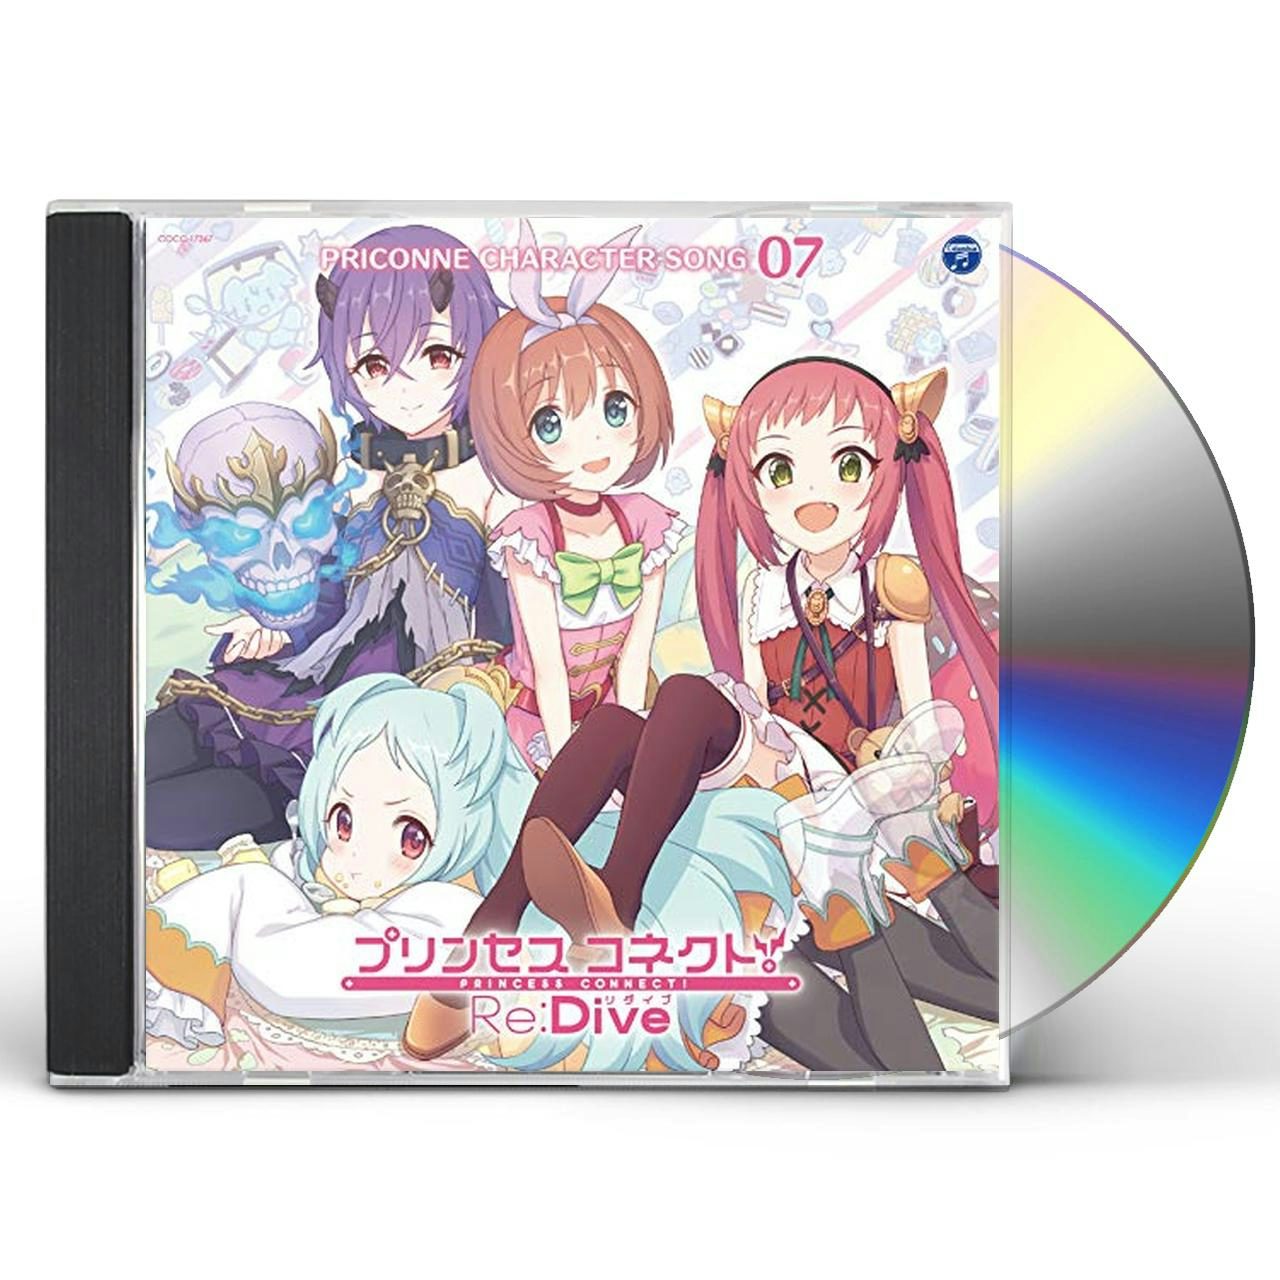 Game Music PRINCESS CONNECT!RE:DIVE PRICONNE CHARACTER SONG CD